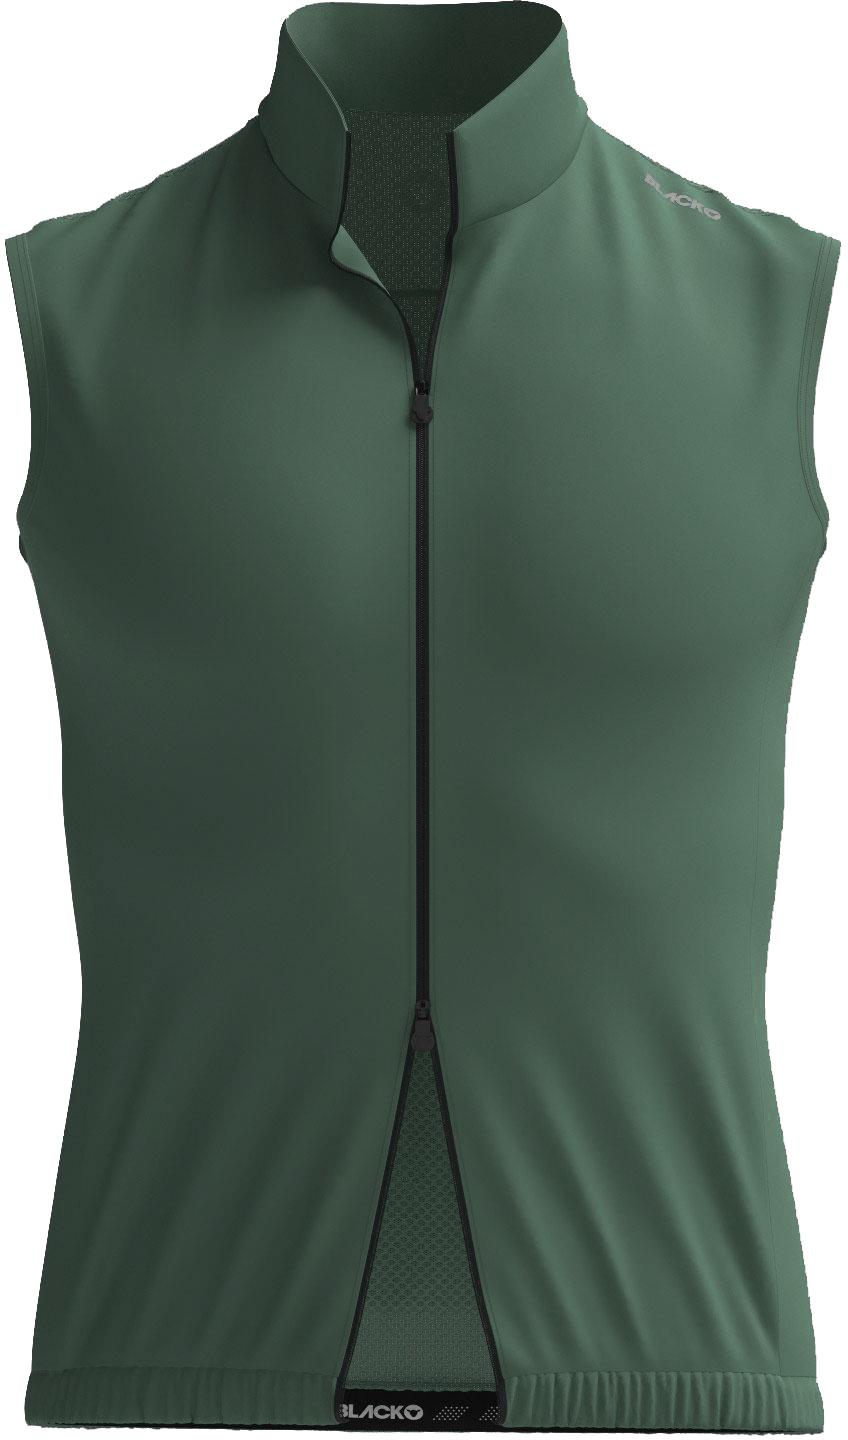 Image of Black Sheep Cycling Essentials TEAM Cycling Vest - Green